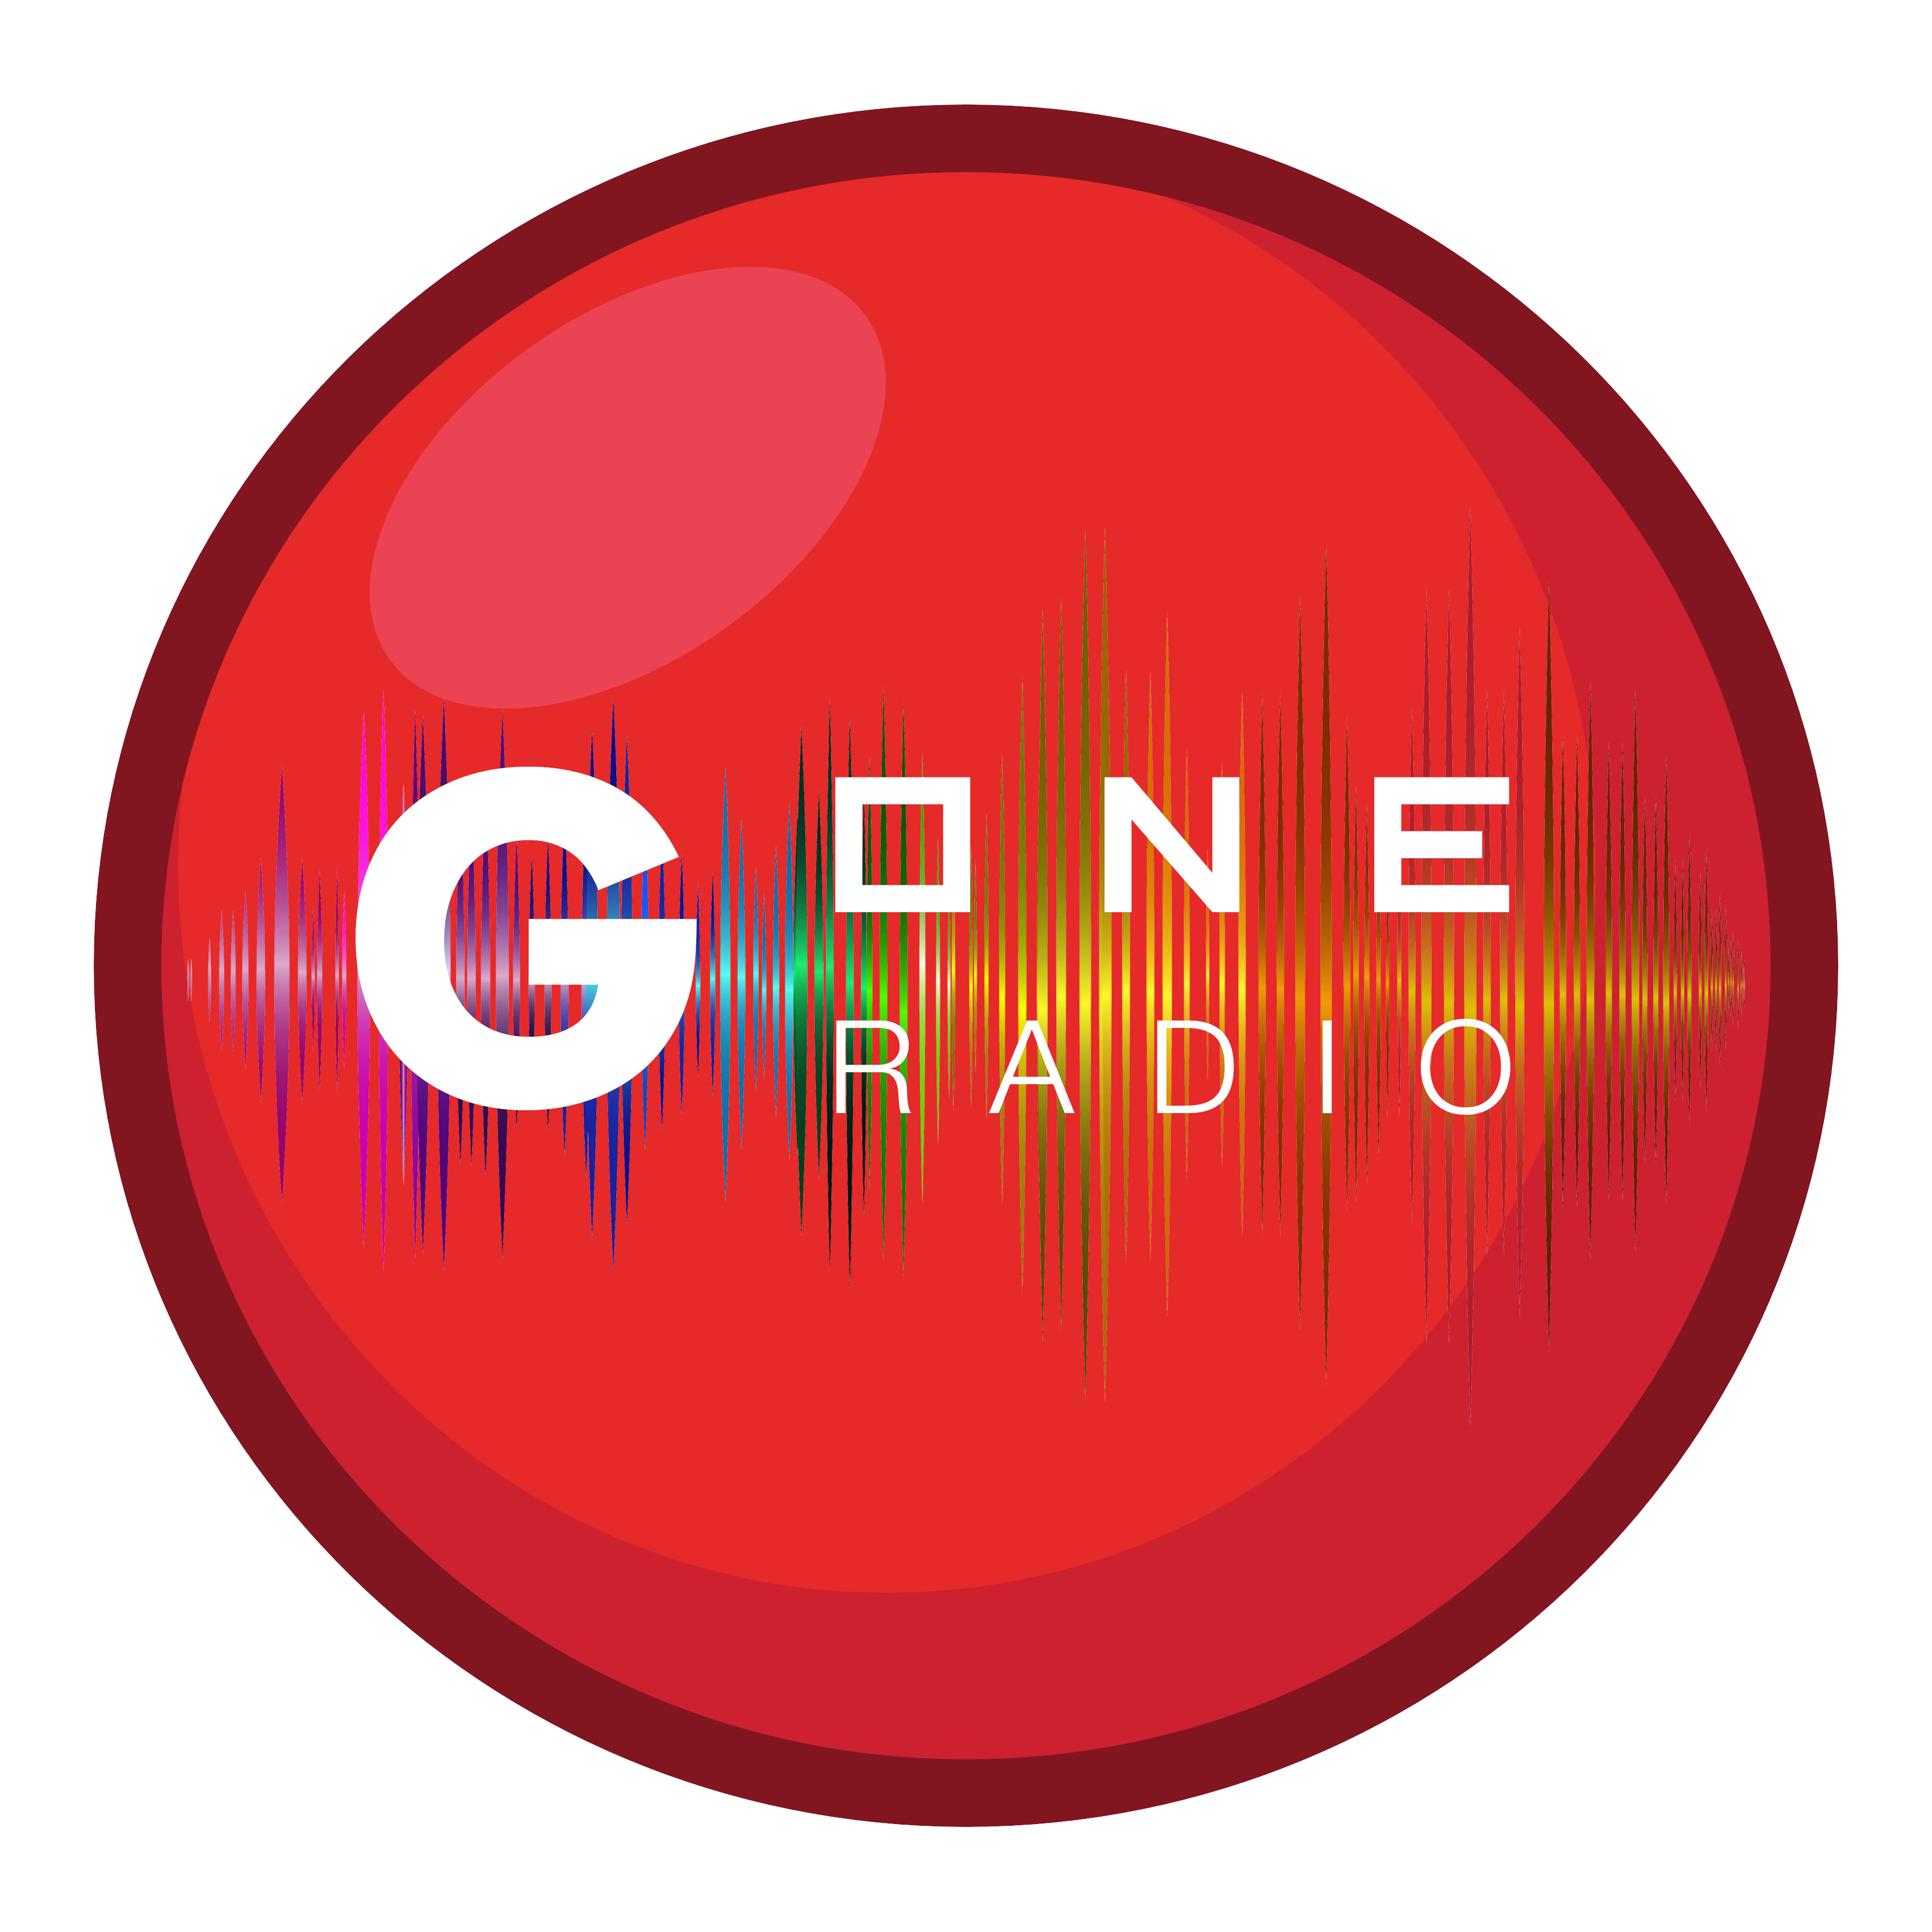 LOGO_ROND_G_ONE_RADIO.png (873 KB)